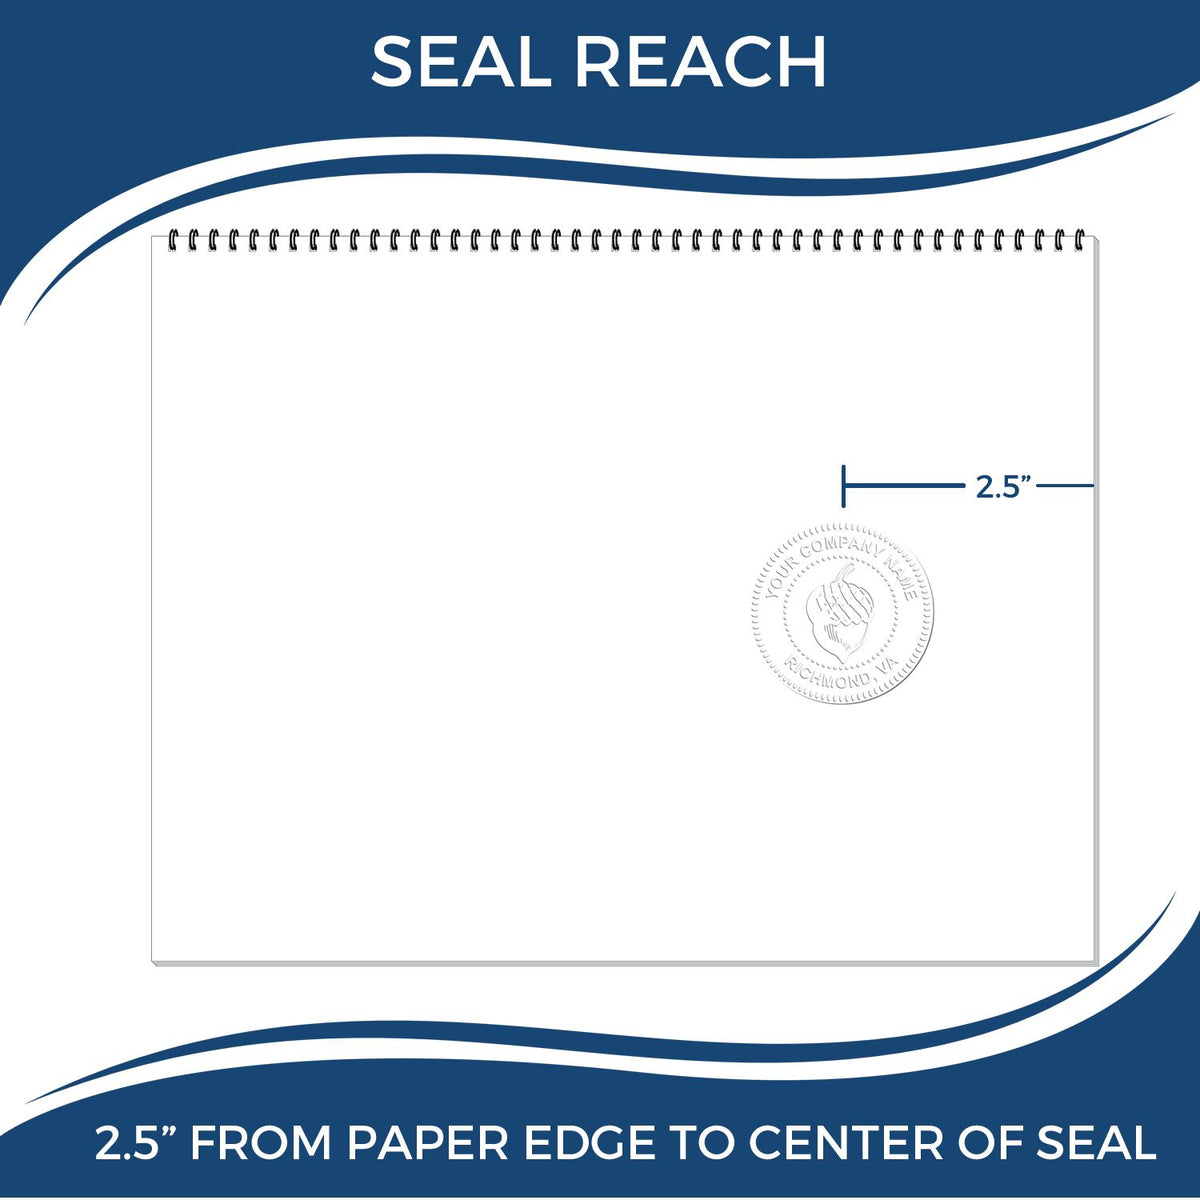 An infographic showing the seal reach which is represented by a ruler and a miniature seal image of the Heavy Duty Cast Iron Indiana Geologist Seal Embosser